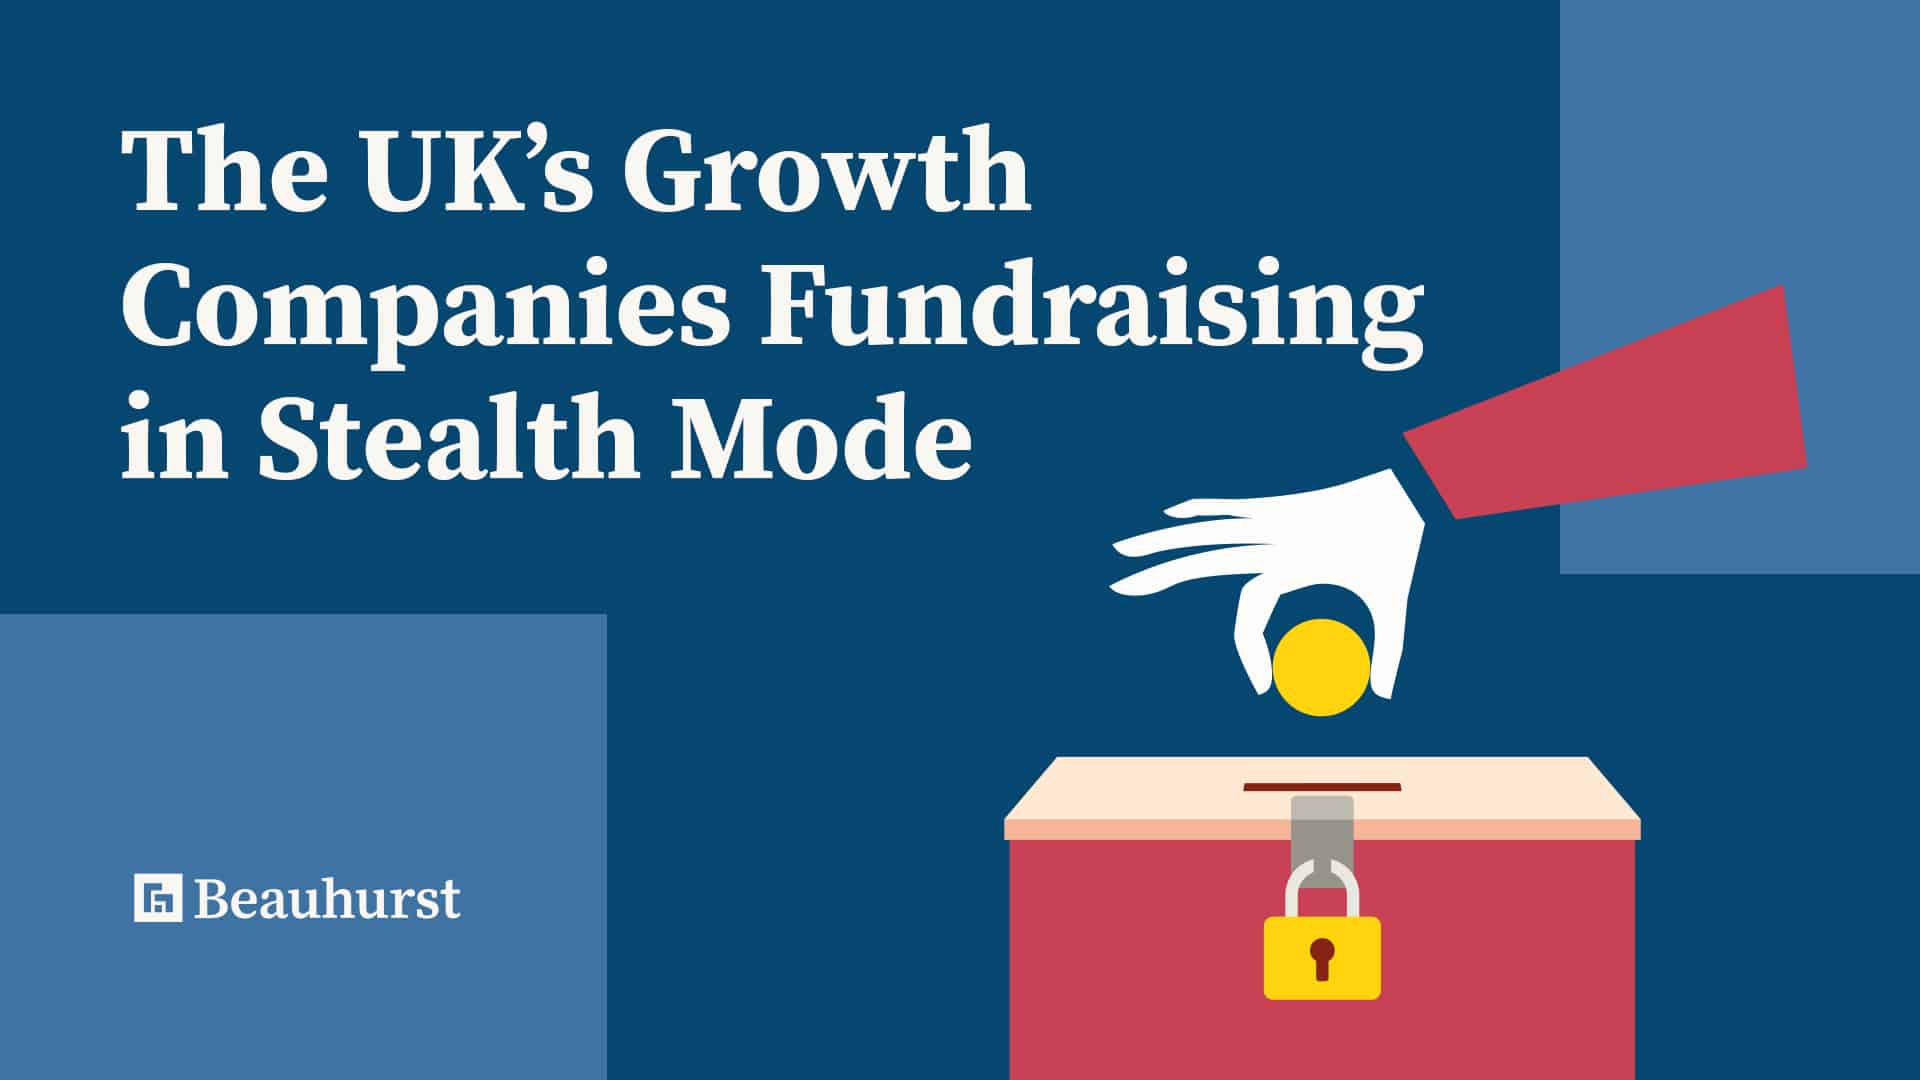 The UK's Growth Companies Fundraising in Stealth Mode